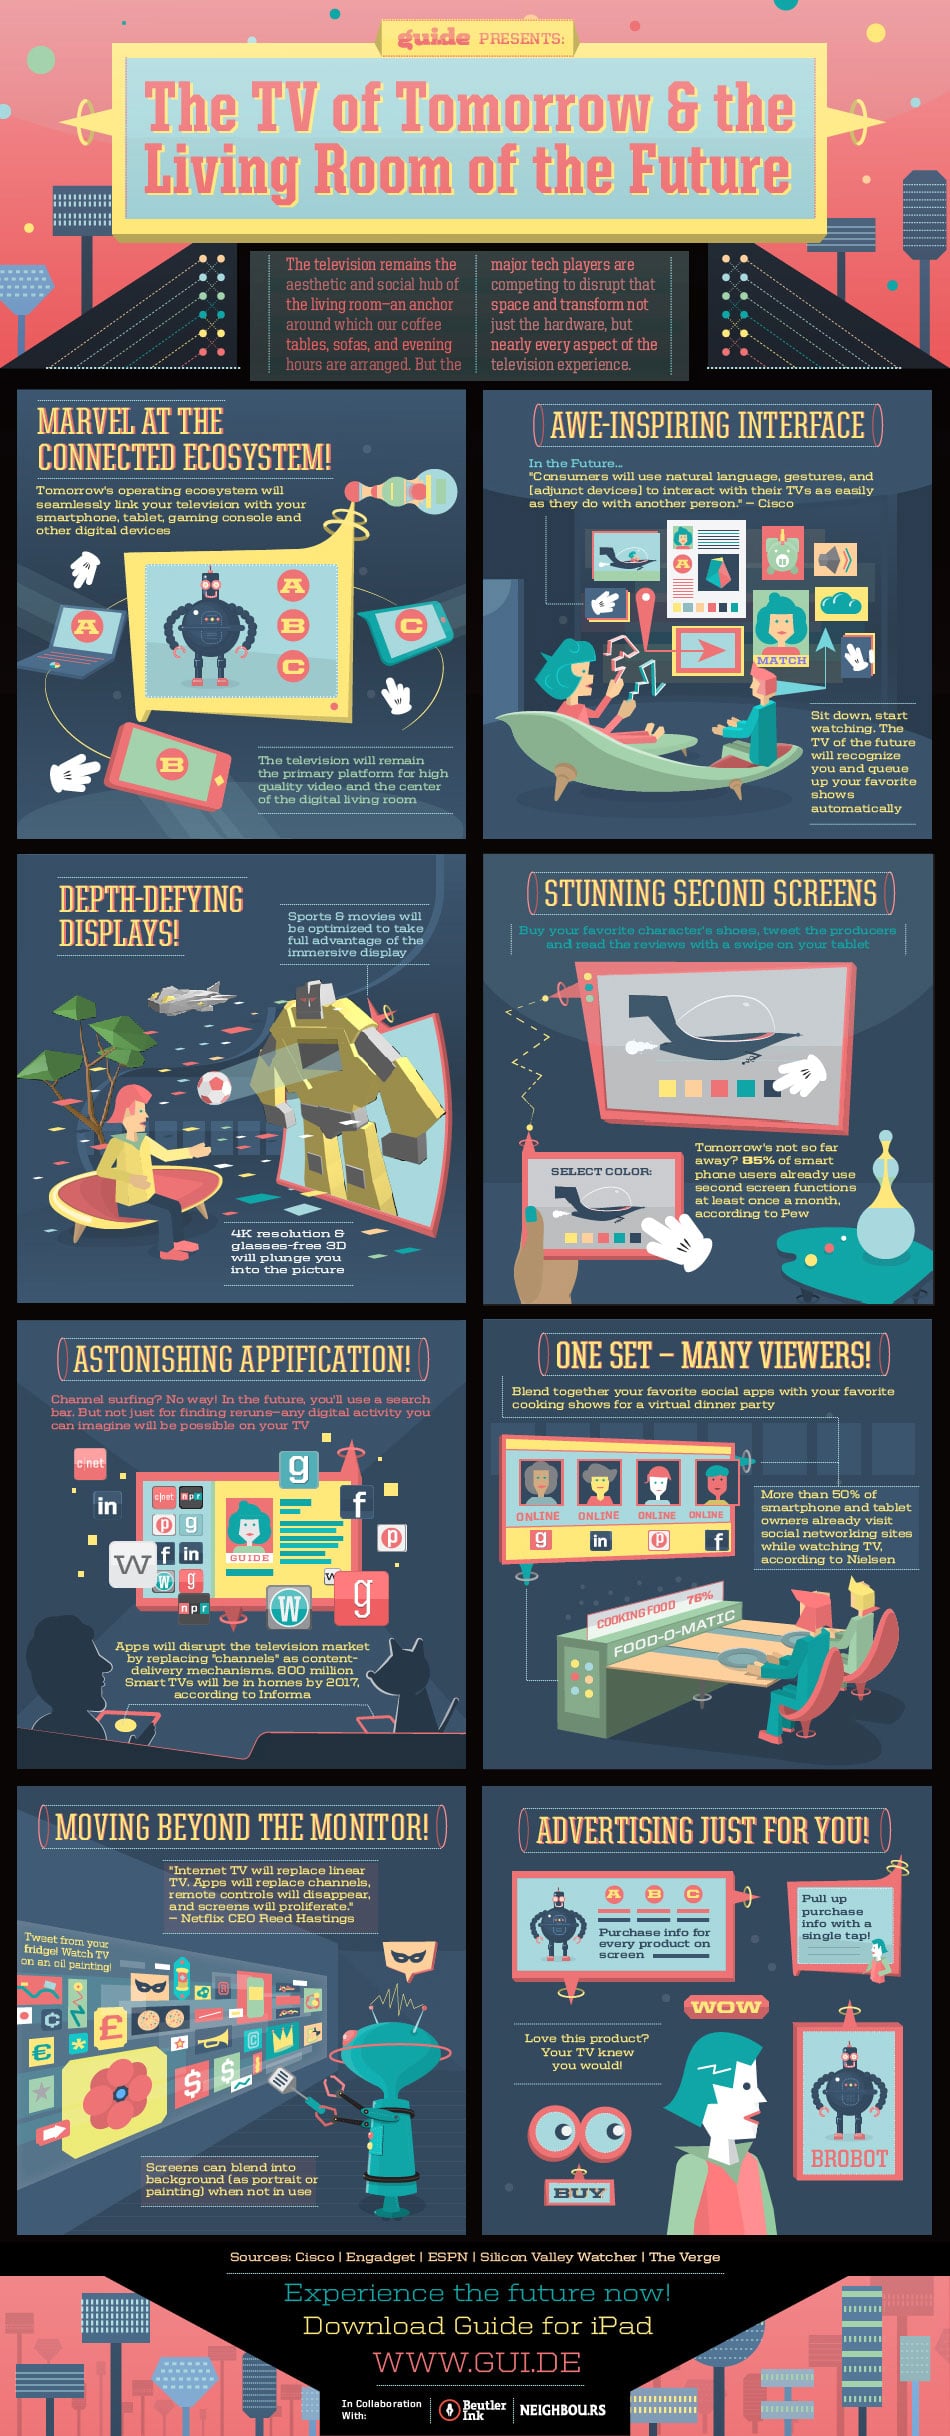 The Future Of Television In Your Soon-To-Be Living Room [Infographic]